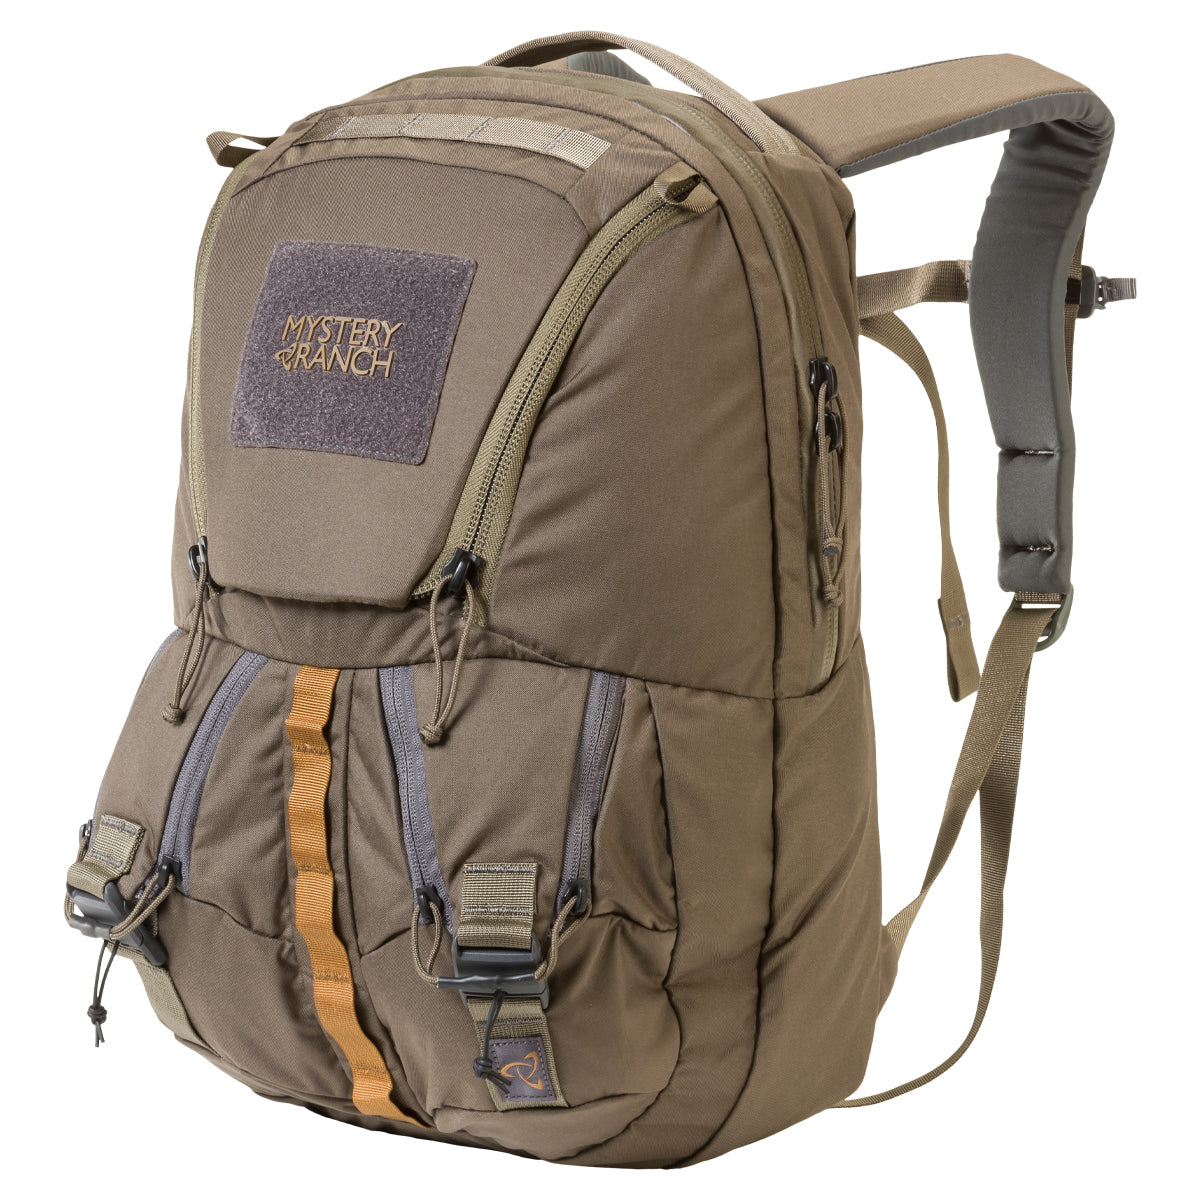 Mystery Ranch Rip Ruck 24 Backpack in  by GOHUNT | Mystery Ranch - GOHUNT Shop